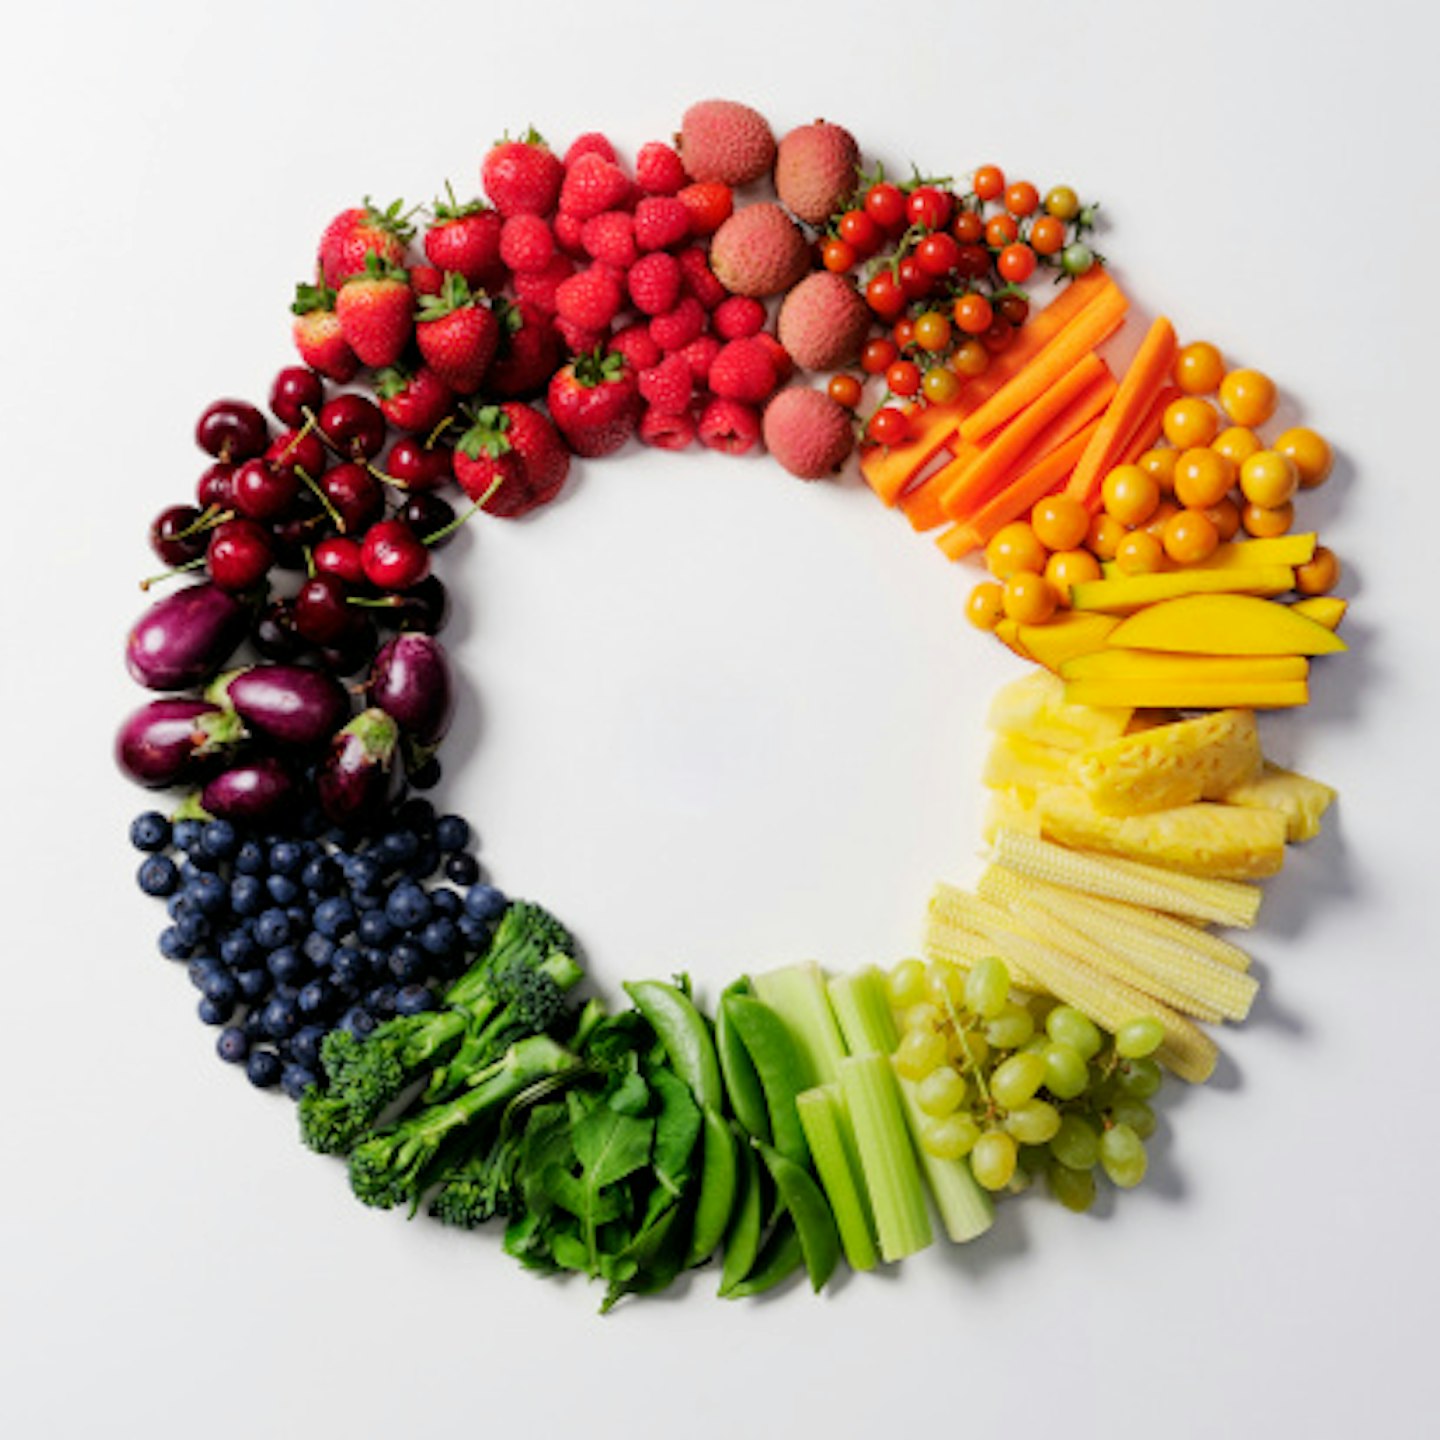 Rainbow of fruit and vegetables arranged in a circle